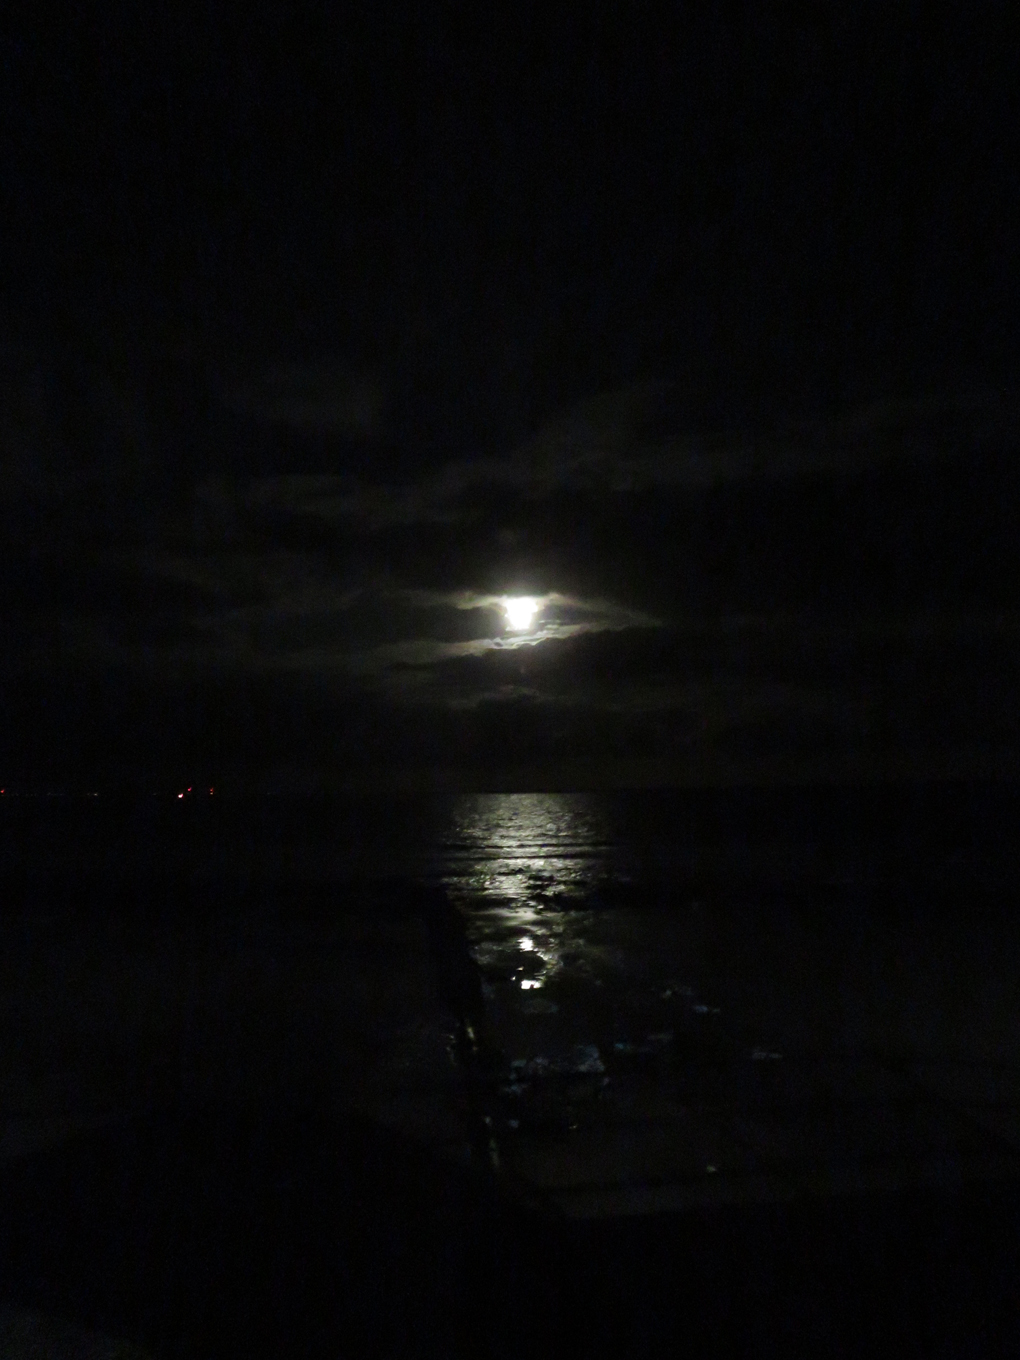 We see an almost black and white picture of the moon and its reflection on the sea at night